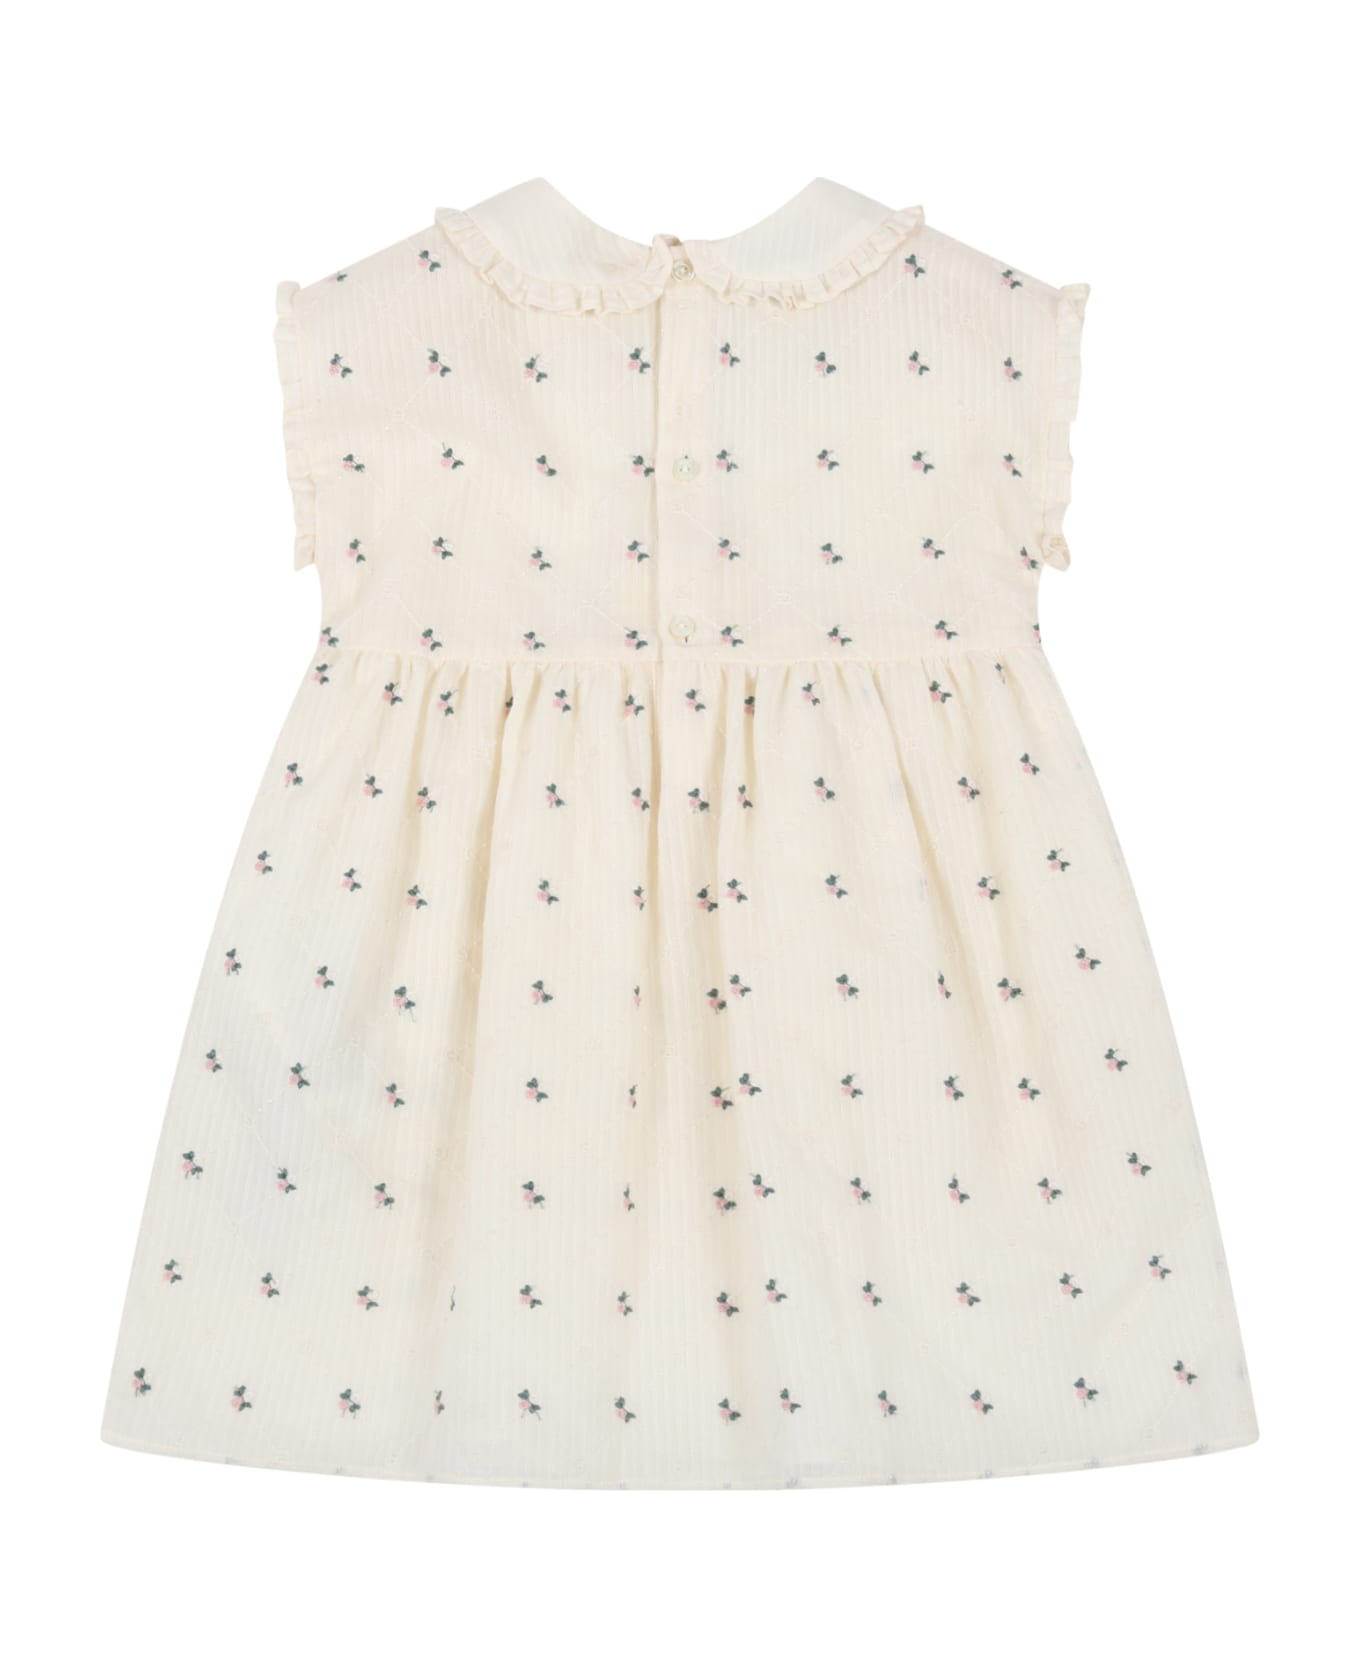 Gucci Ivory Dress For Baby Girl With Flowers - White